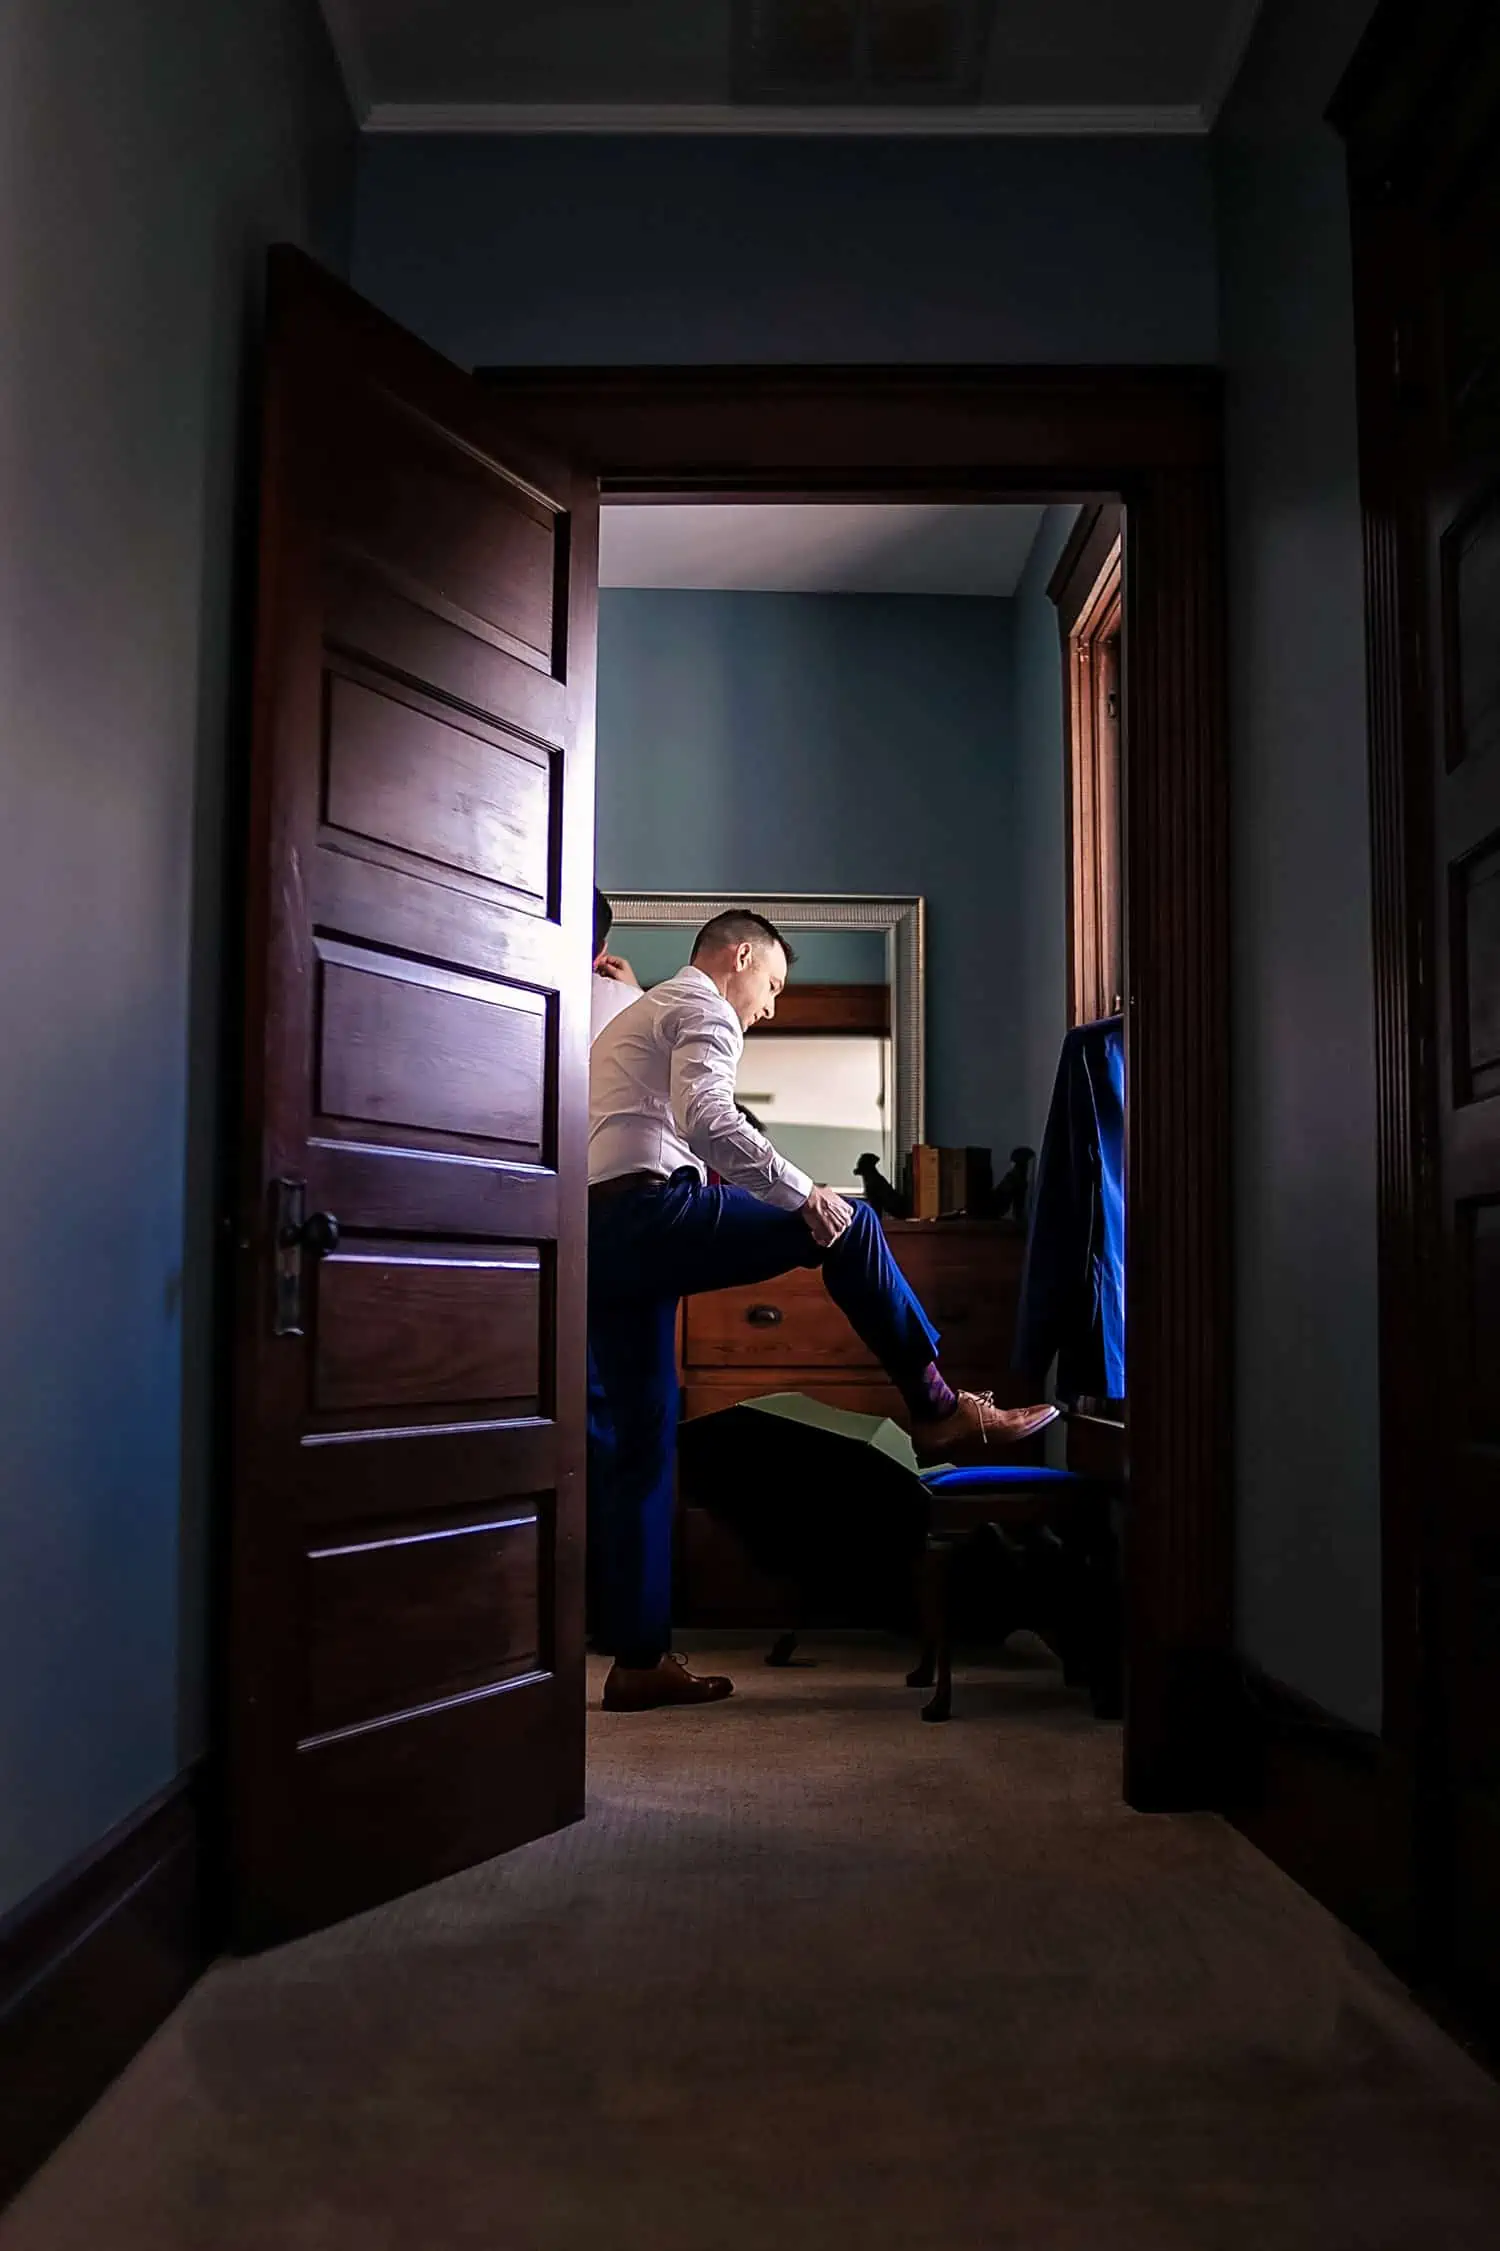 A man putting on his shoes in a room.